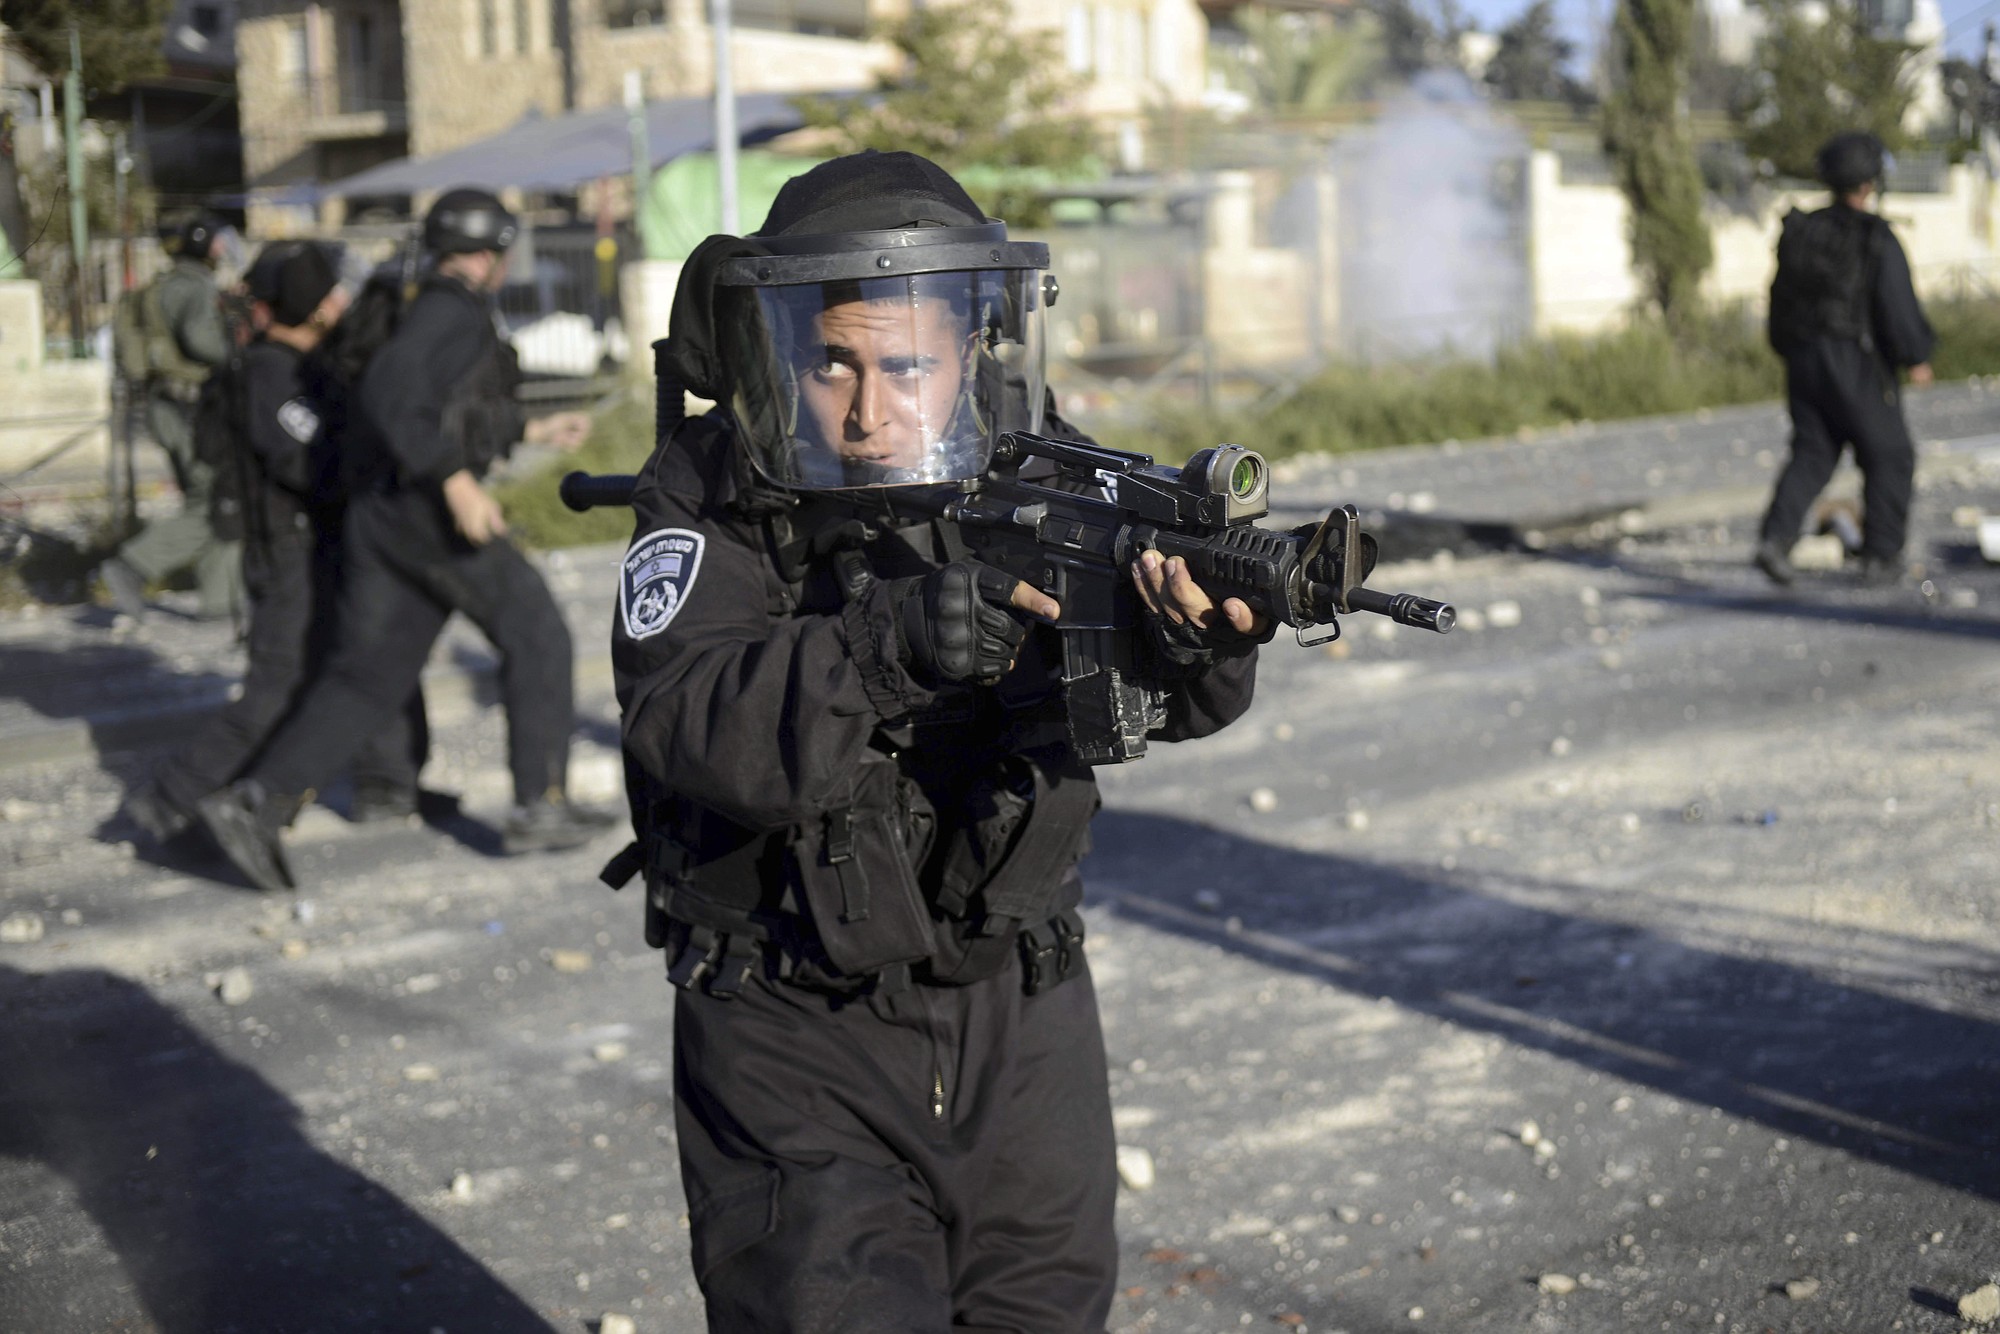 An Israeli border policeman aims his weapon Thursday during clashes with Palestinians in Jerusalem. The violence erupted Wednesday after a 16-year-old Palestinian Mohammed Abu Khdeir was abducted and a charred body, believed to be the boy, was found in a Jerusalem forest.